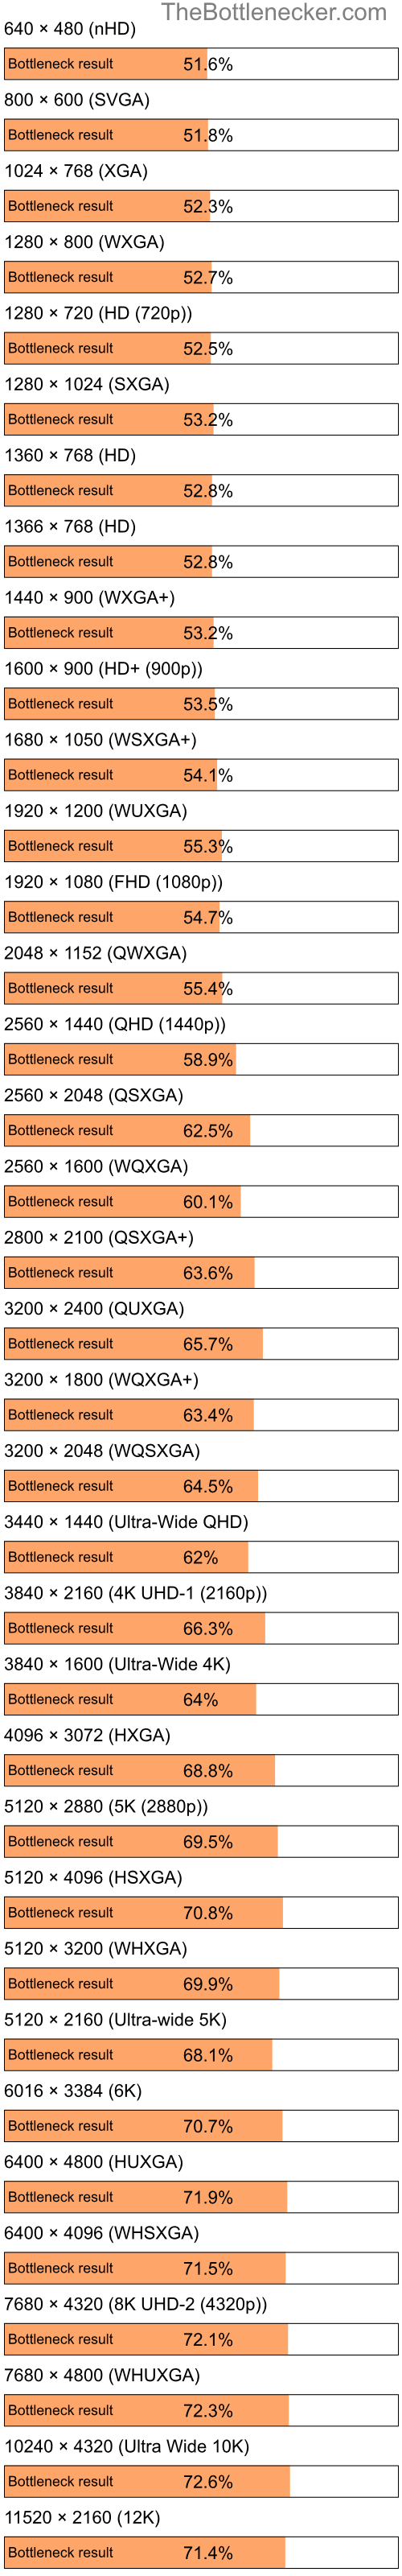 Bottleneck results by resolution for Intel Celeron and AMD M880G with Mobility Radeon HD 4250 in Processor Intense Tasks